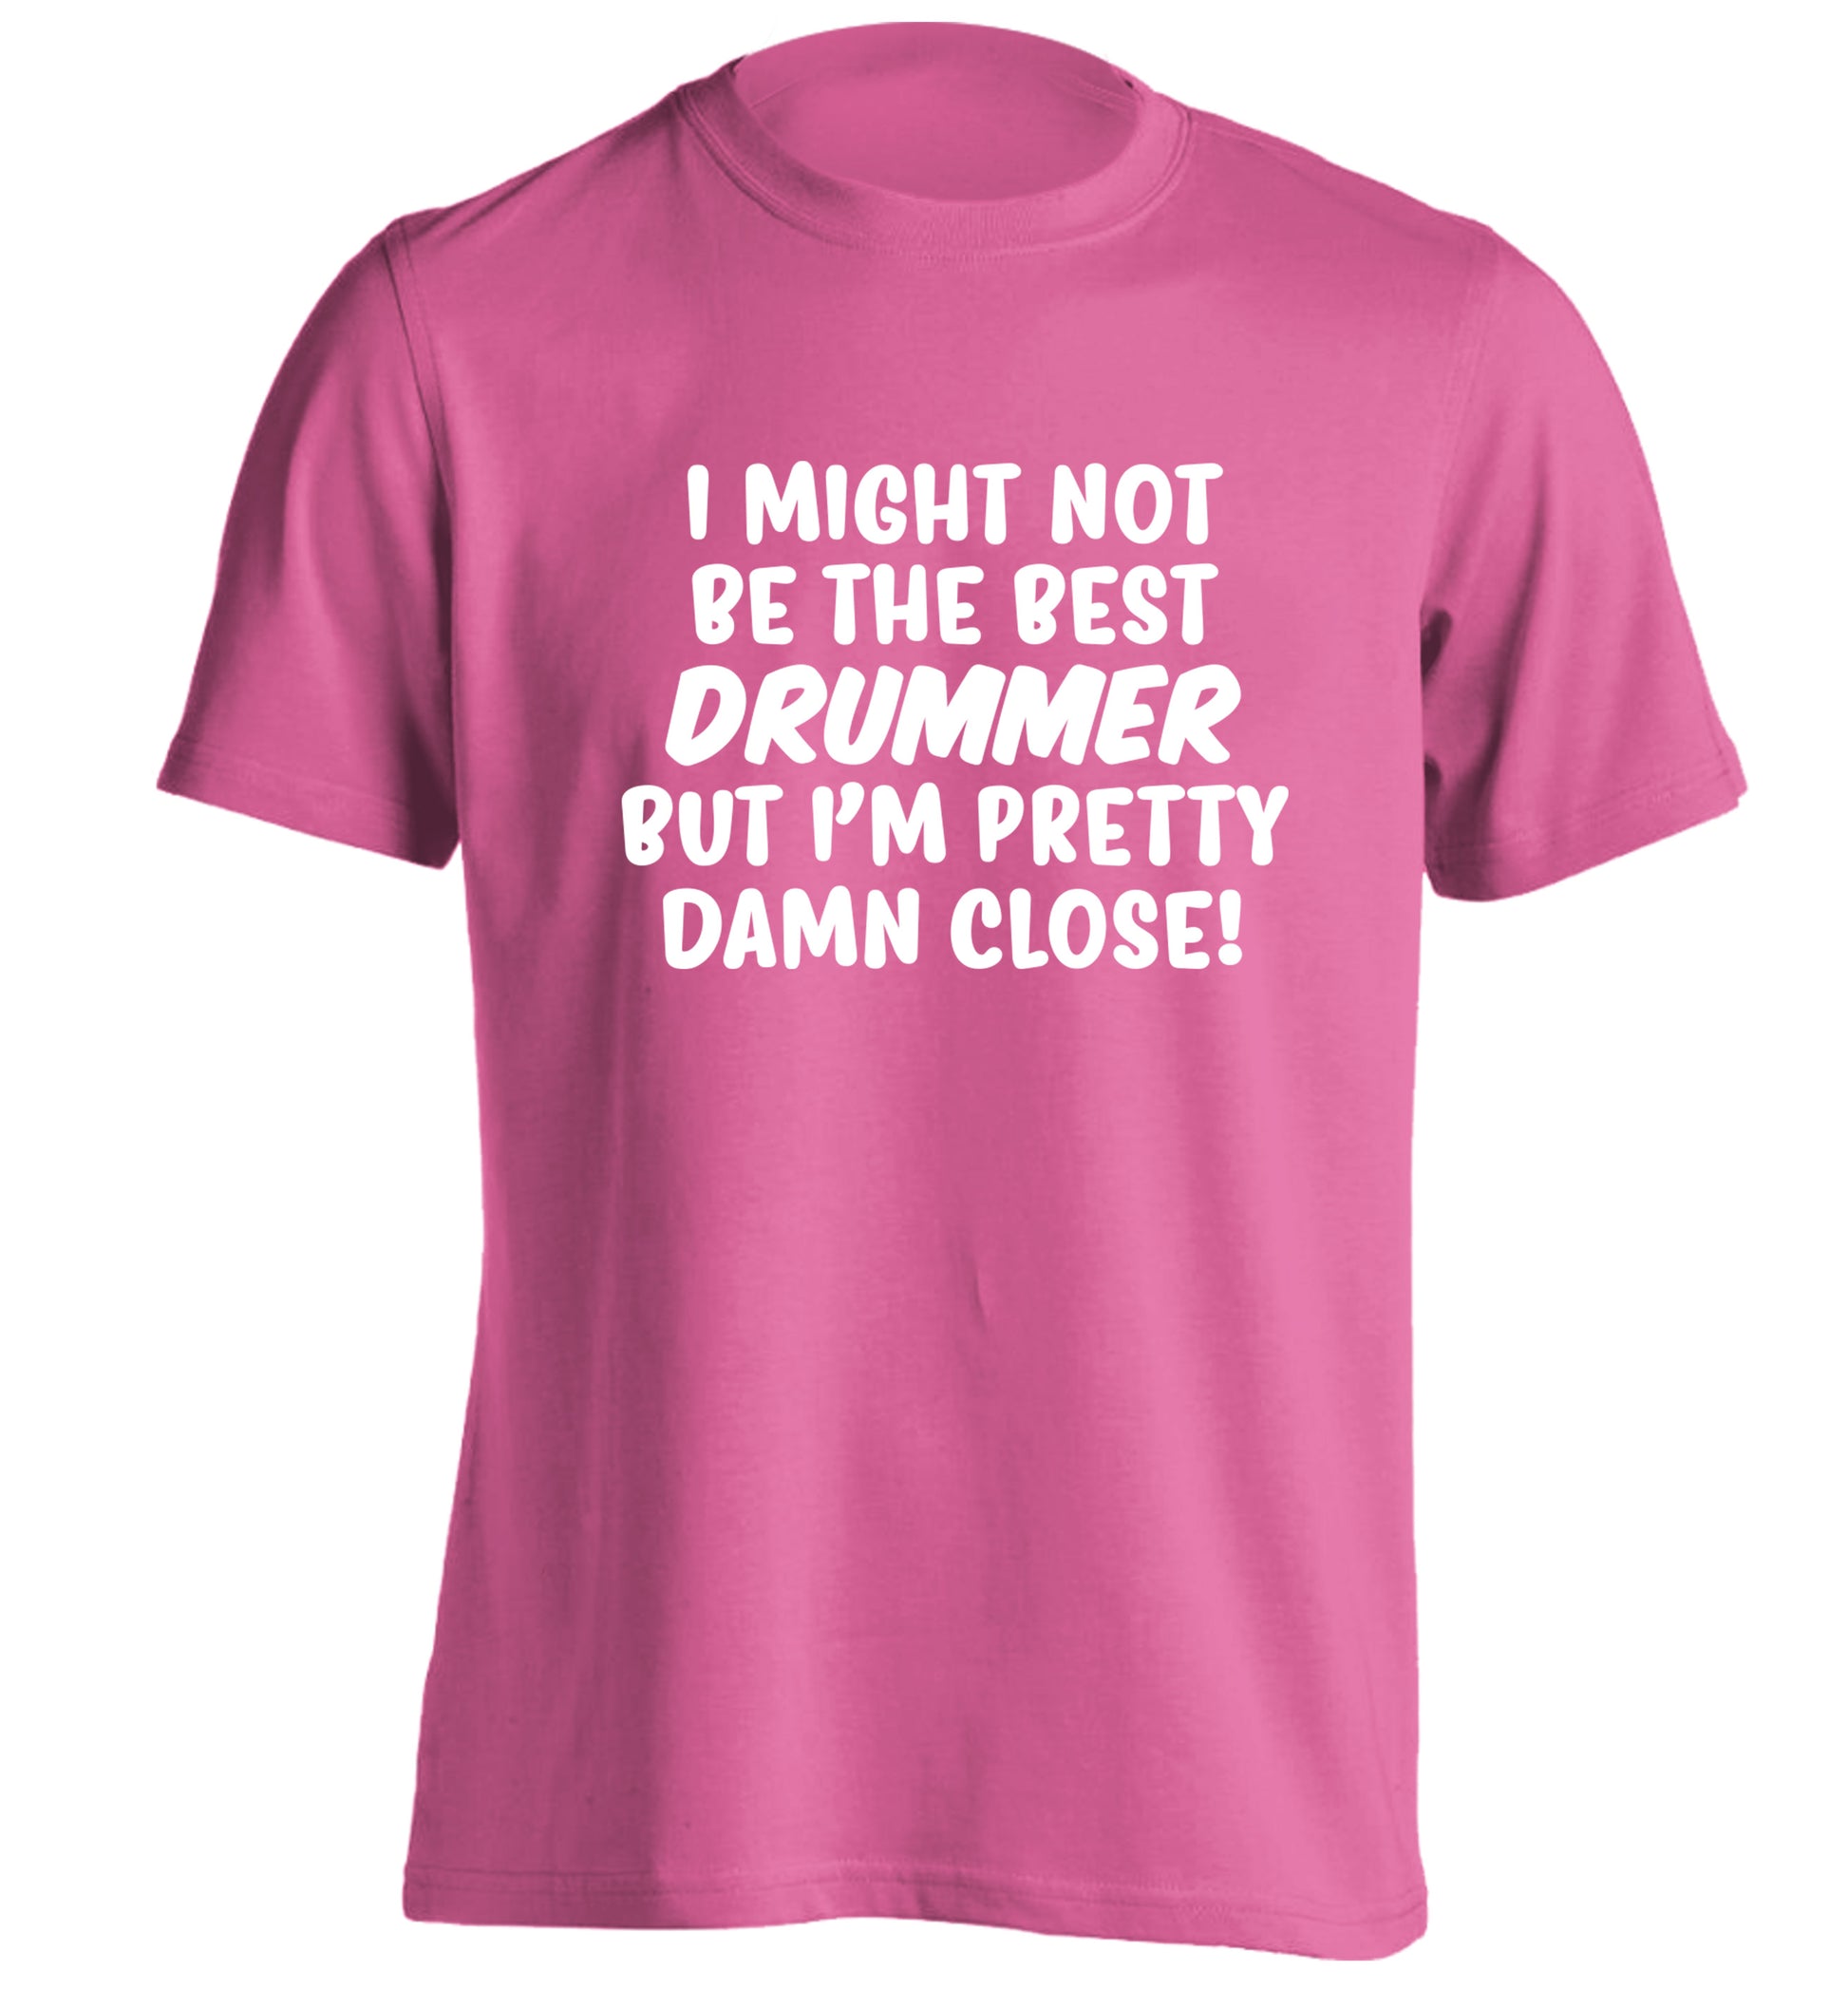 I might not be the best drummer but I'm pretty close! adults unisexpink Tshirt 2XL